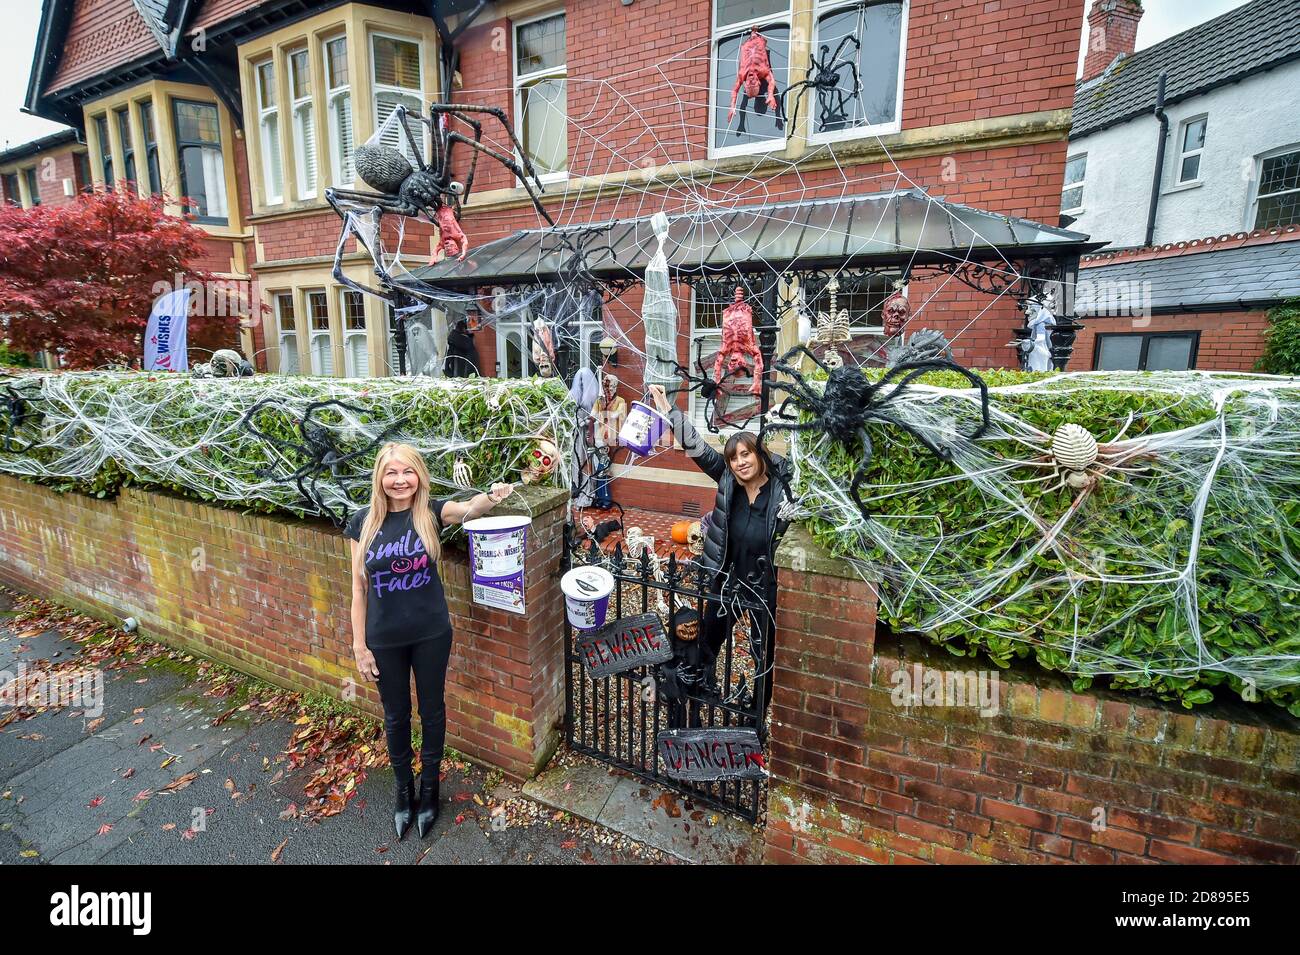 Wendy Hobbs from Dreams & Wishes charity, left, and Carmela Hargreaves hold charity collection buckets at Carmela's family home in Llandaff, near Cardiff, which is decked out and adorned with scores of realistic looking Halloween decorations, installed by her husband Danny Hargreaves, who works in TV special effects, as they are raising money for the charity by public donation. Stock Photo